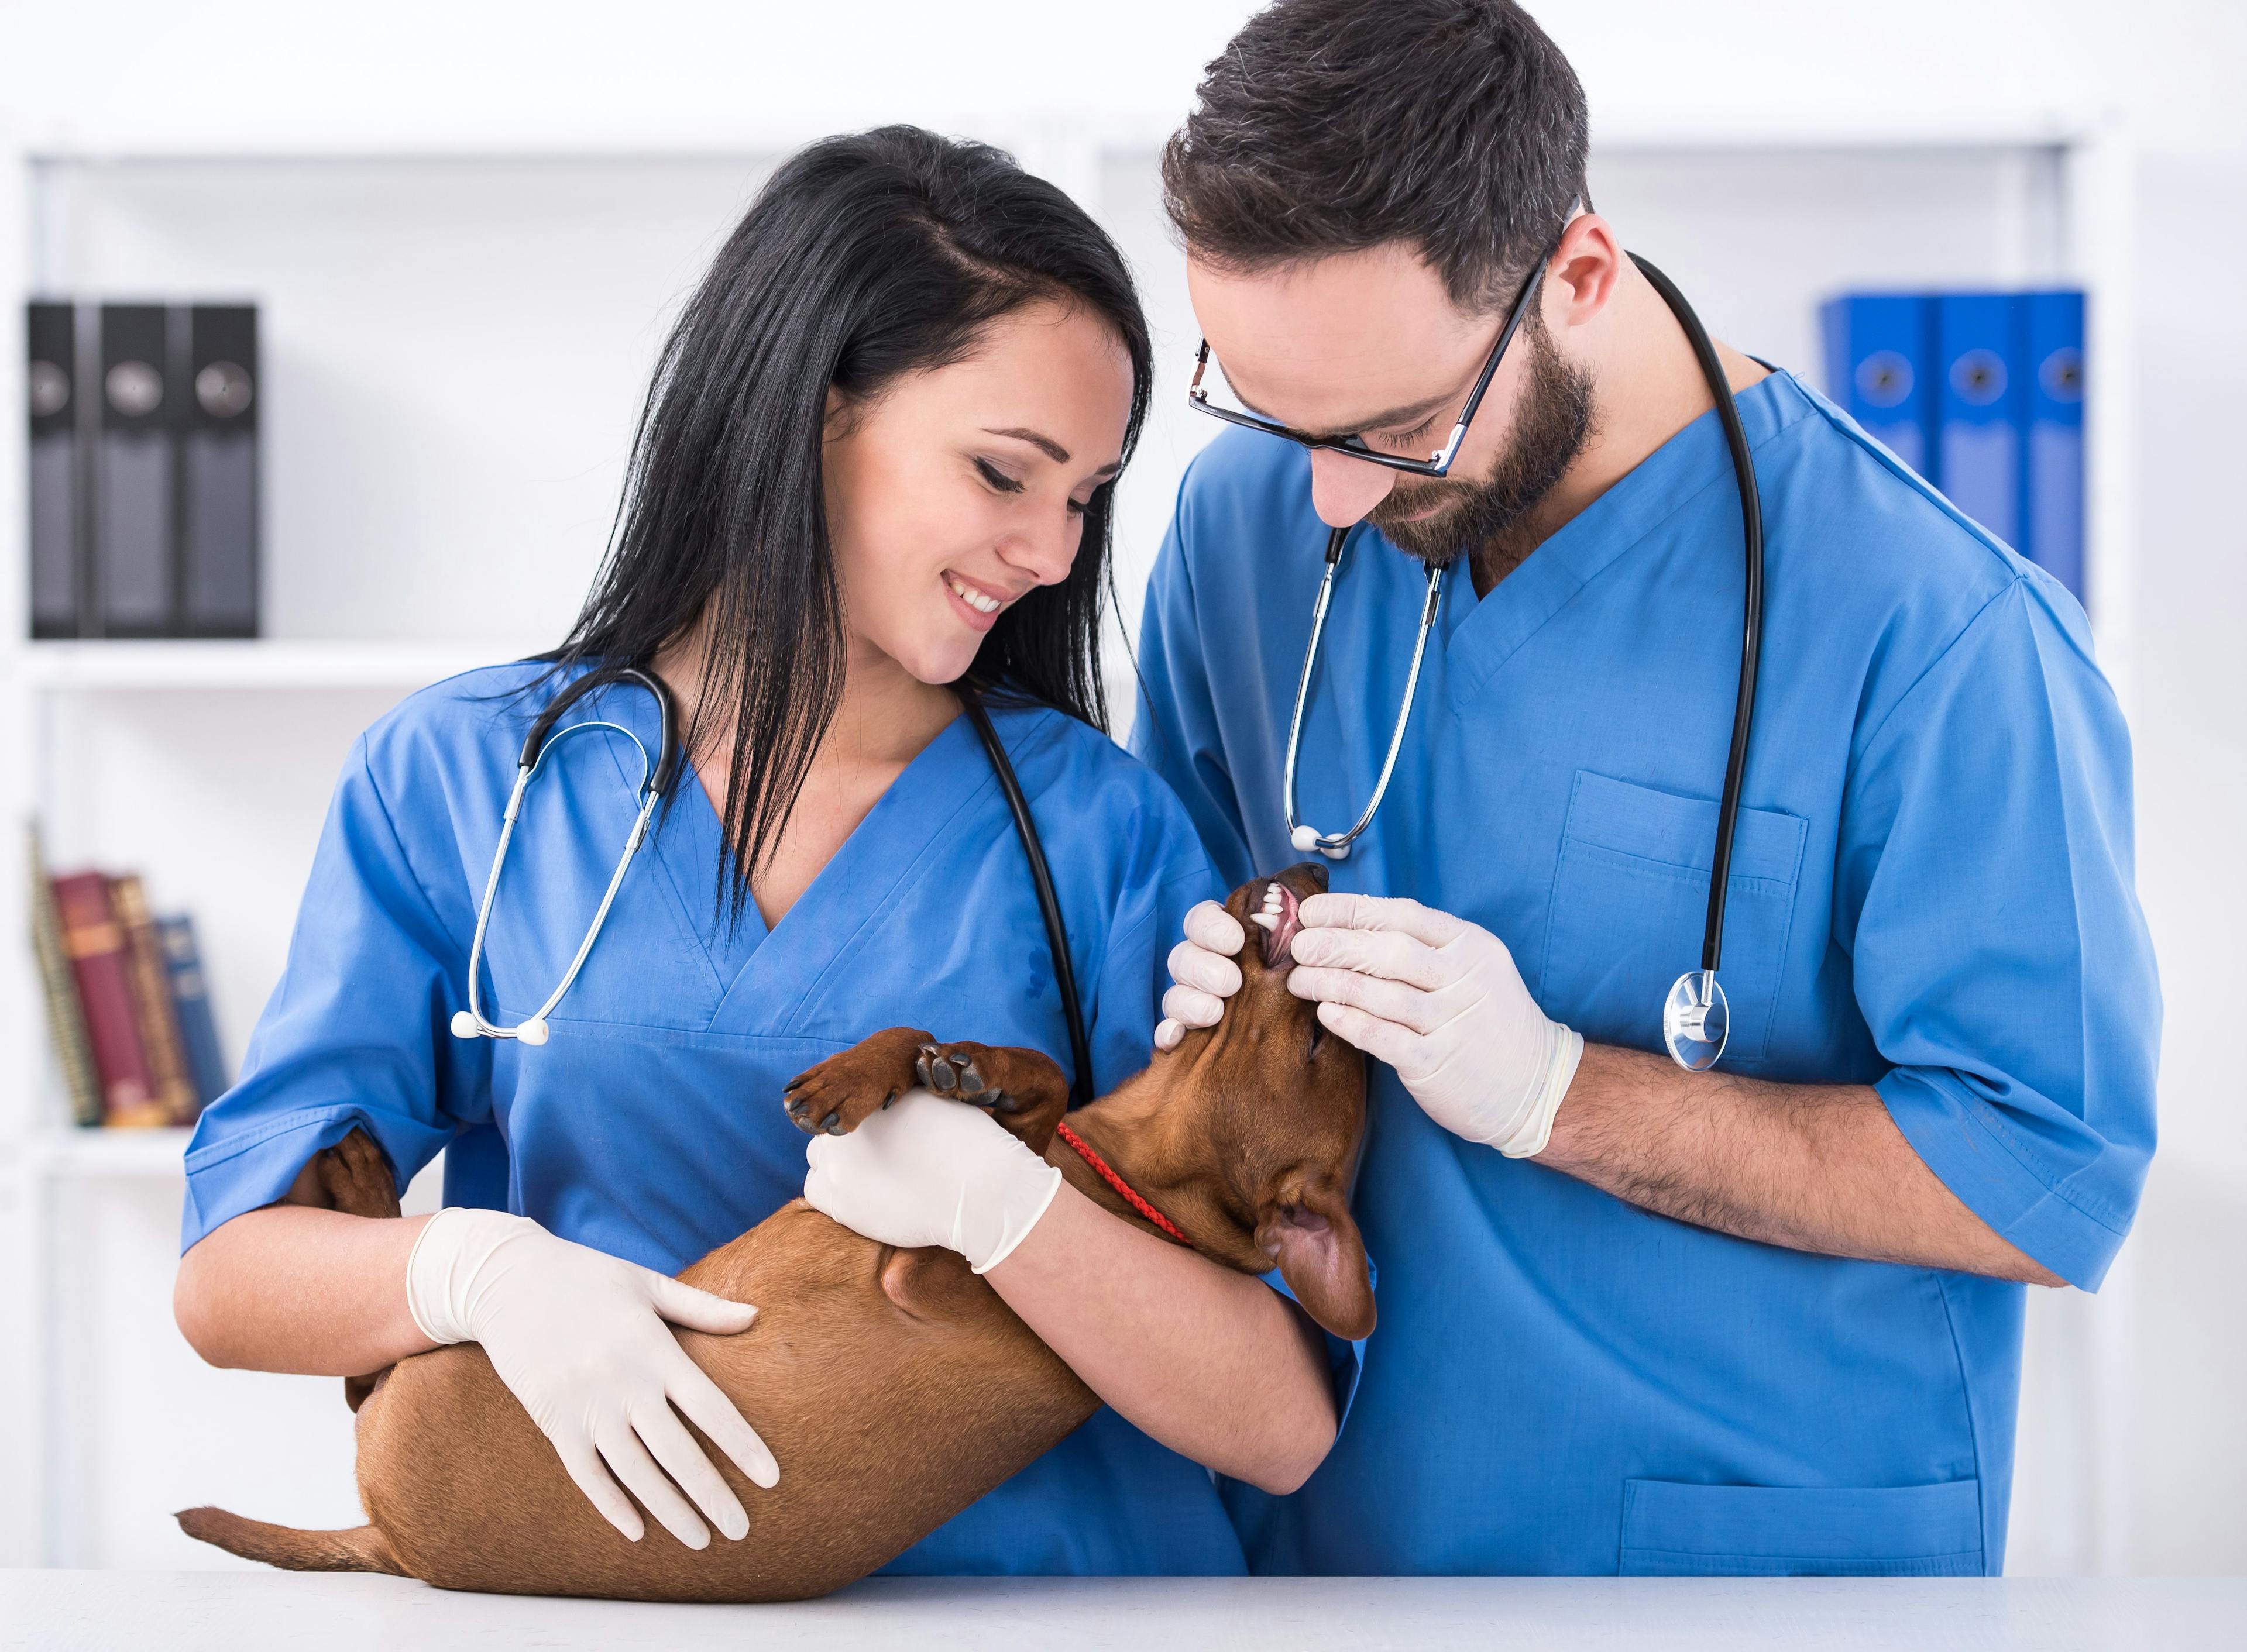 3 Must-sees for National Veterinary Technician Week